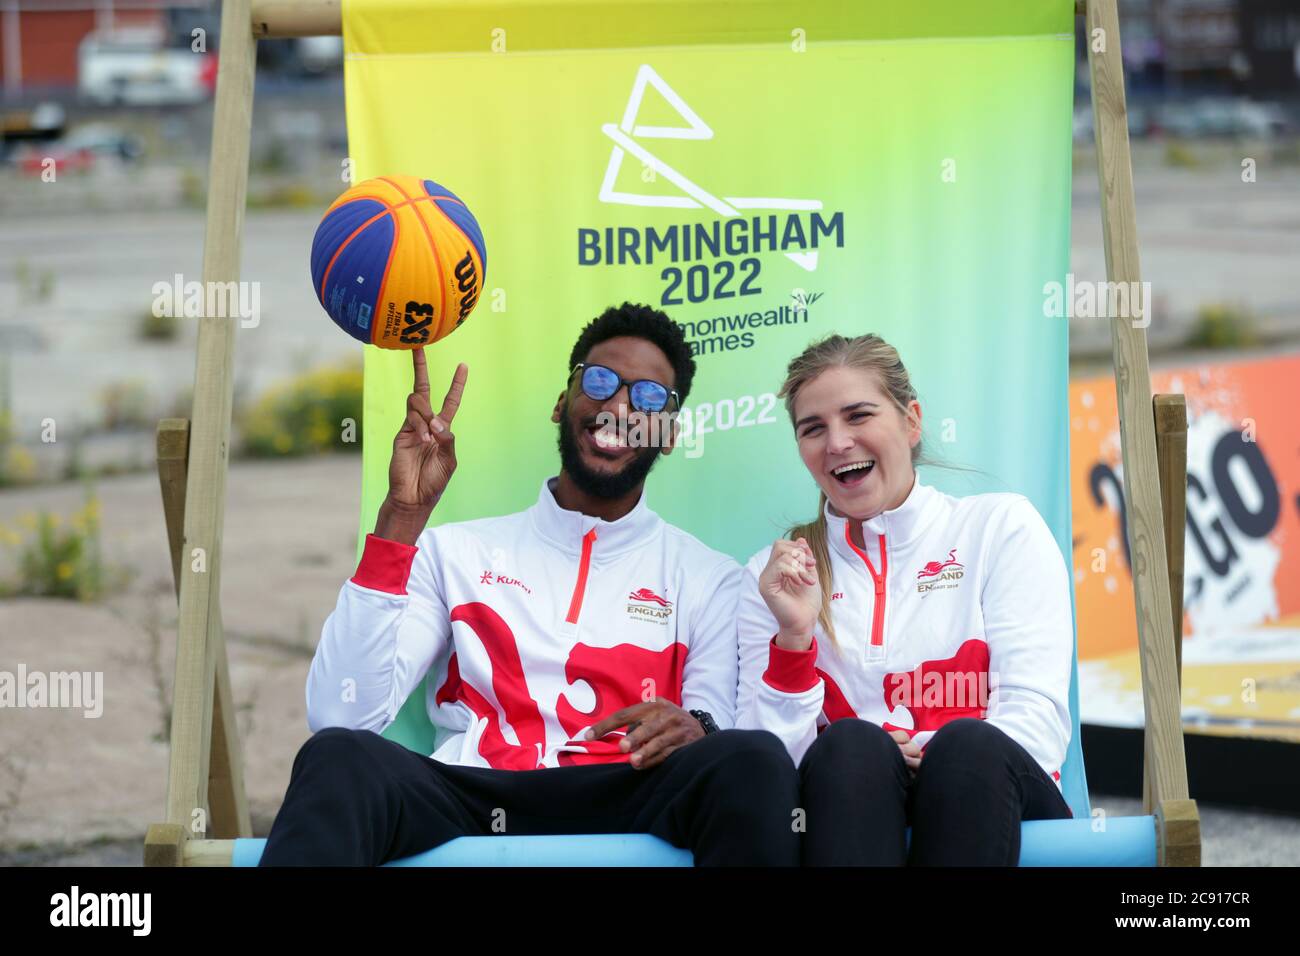 Team England's Jamal Anderson and Georgia Jones at Smithfield, Birmingham City Centre. The Birmingham 2022 basketball and beach volleyball competitions will take place in the city centre location of Smithfield, Smithfield is the site of the former Birmingham Wholesale Market, which was cleared in 2018 and is the focus of a major regeneration plan. Stock Photo